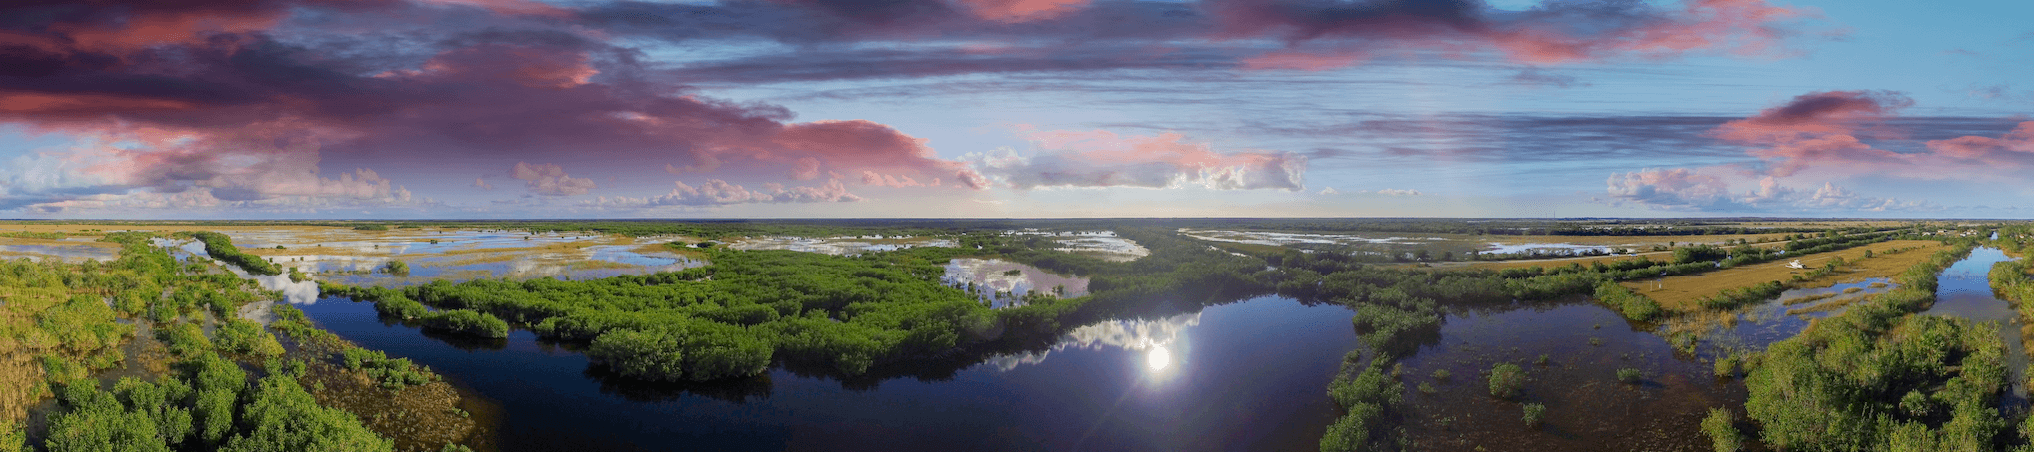 National Park Week - Free Entry Day Everglades National Park